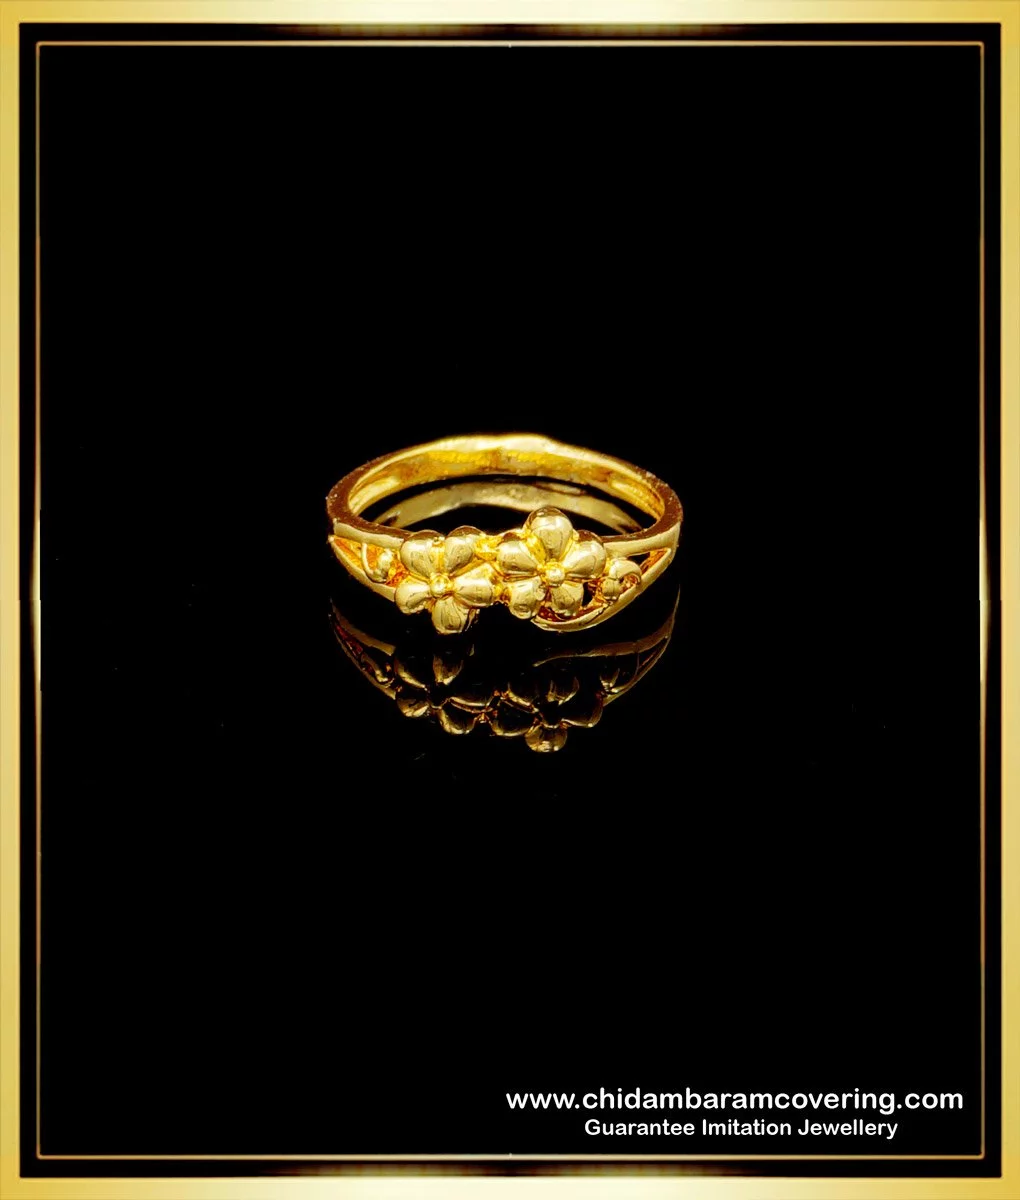 18 Gold Ladies Finger Ring, 1.100 at Rs 5000 in Deoria | ID: 25936861530